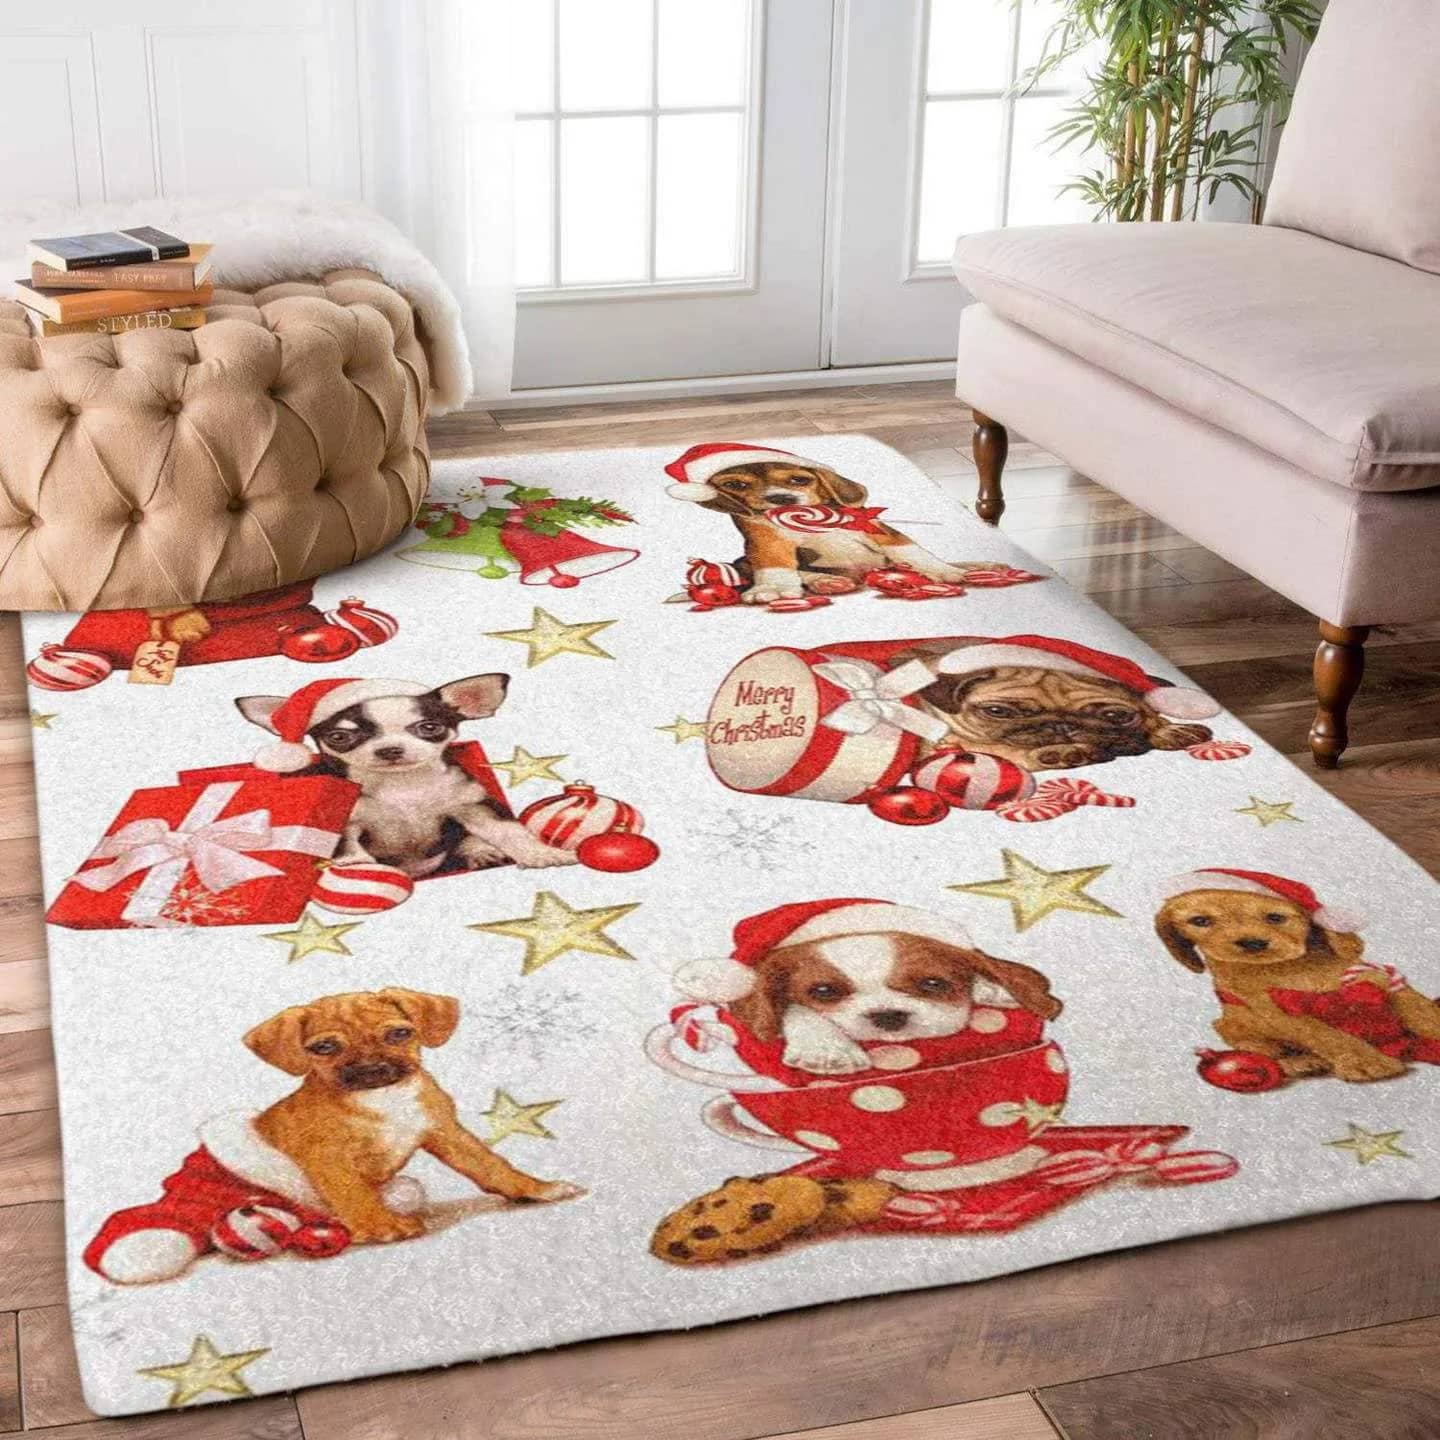 Dogs Christmas Limited Edition Amazon Best Seller Sku 262694 Rug